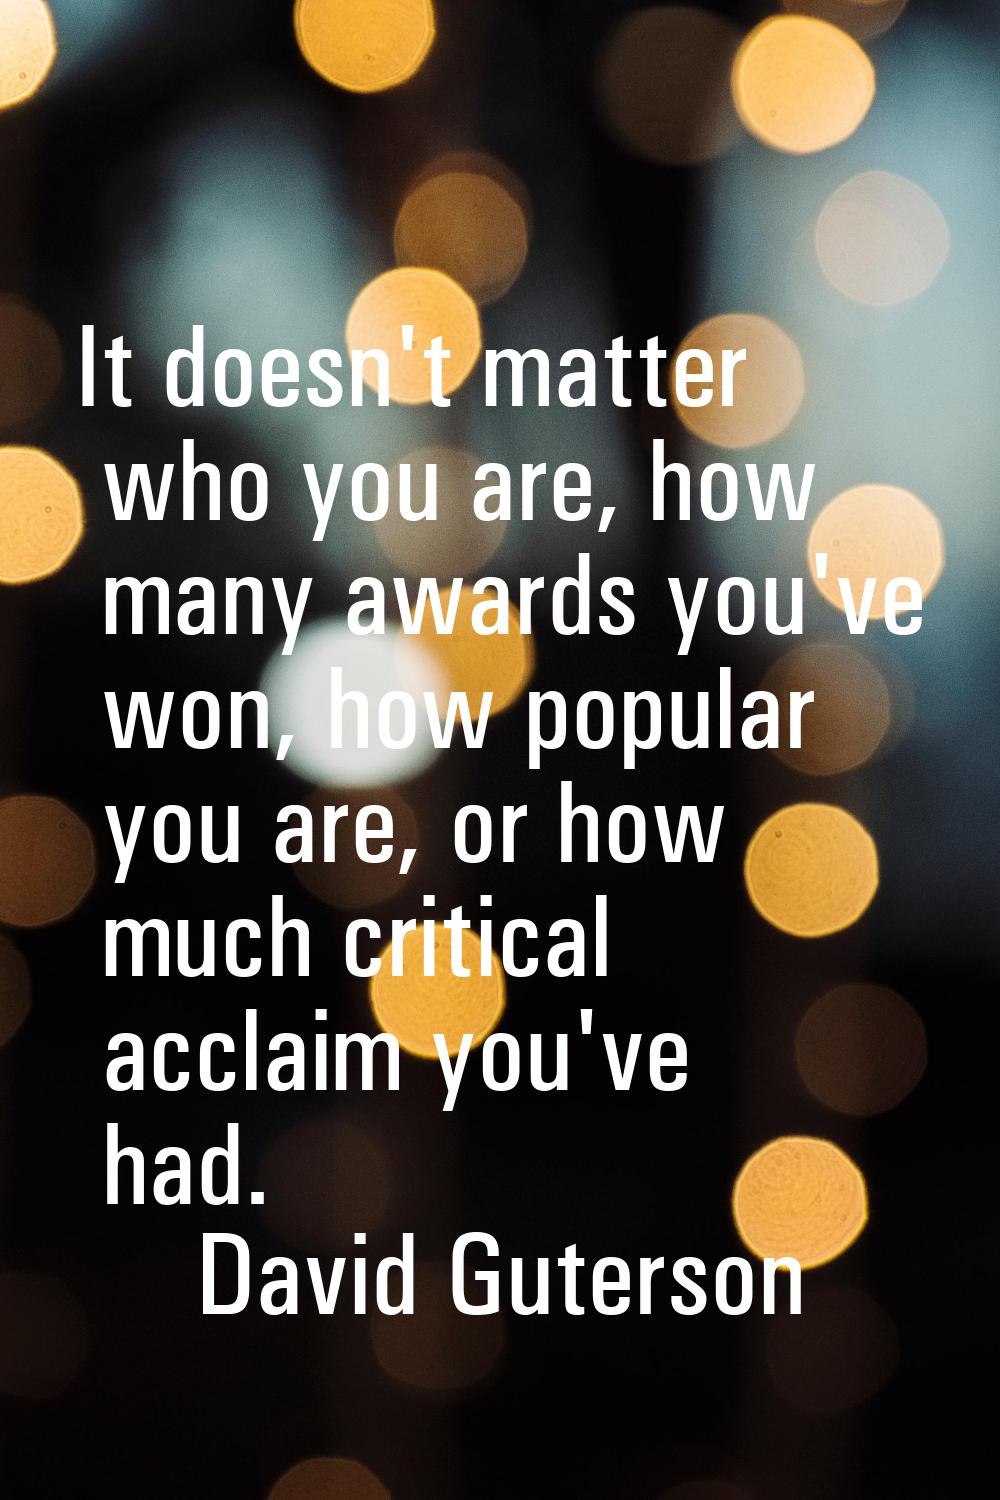 It doesn't matter who you are, how many awards you've won, how popular you are, or how much critica